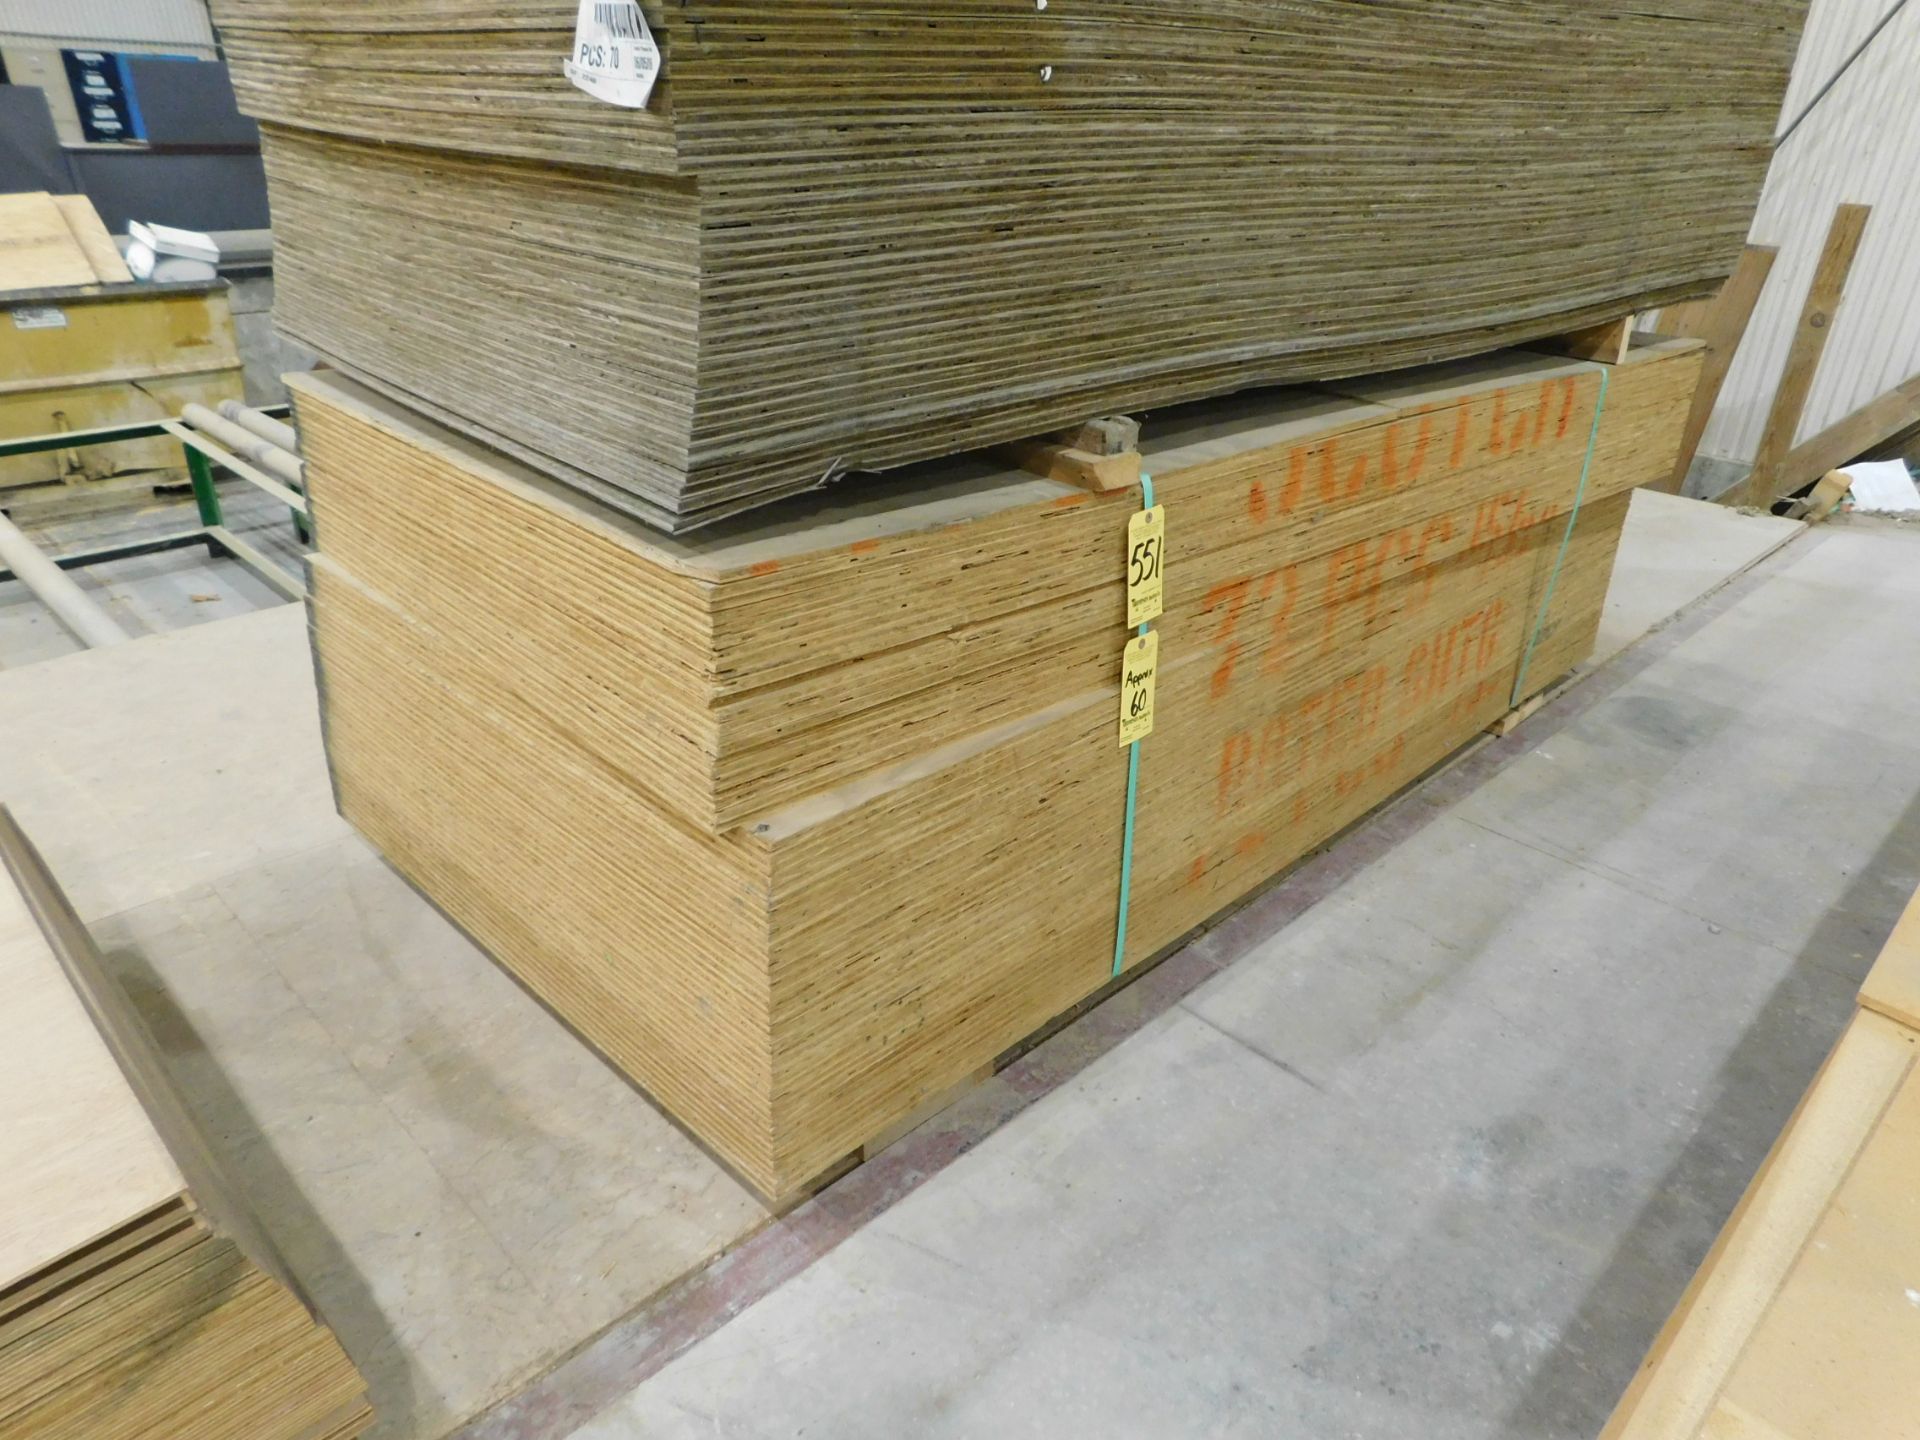 Plywood Sheets, 4' X 8' X 1/2", Approx. 60 Pieces